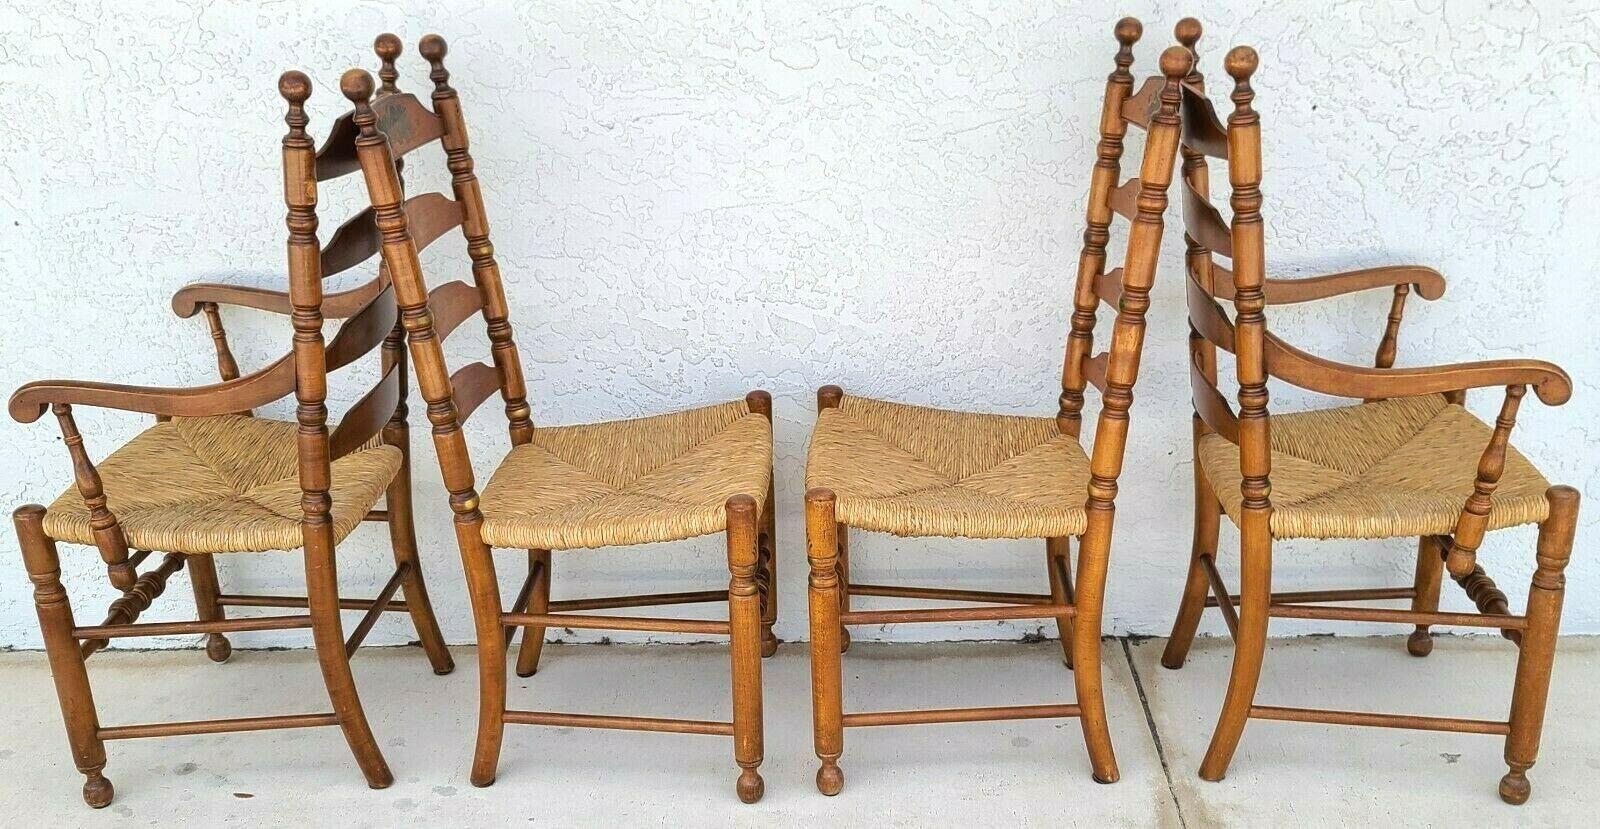 For FULL item description click on CONTINUE READING at the bottom of this page.

Offering One Of Our Recent Palm Beach Estate Fine Furniture Acquisitions Of A 
Set of 4 Vintage L Hitchcock Harvest Stenciled Ladder Back Rush Seat Dining Chairs
Set